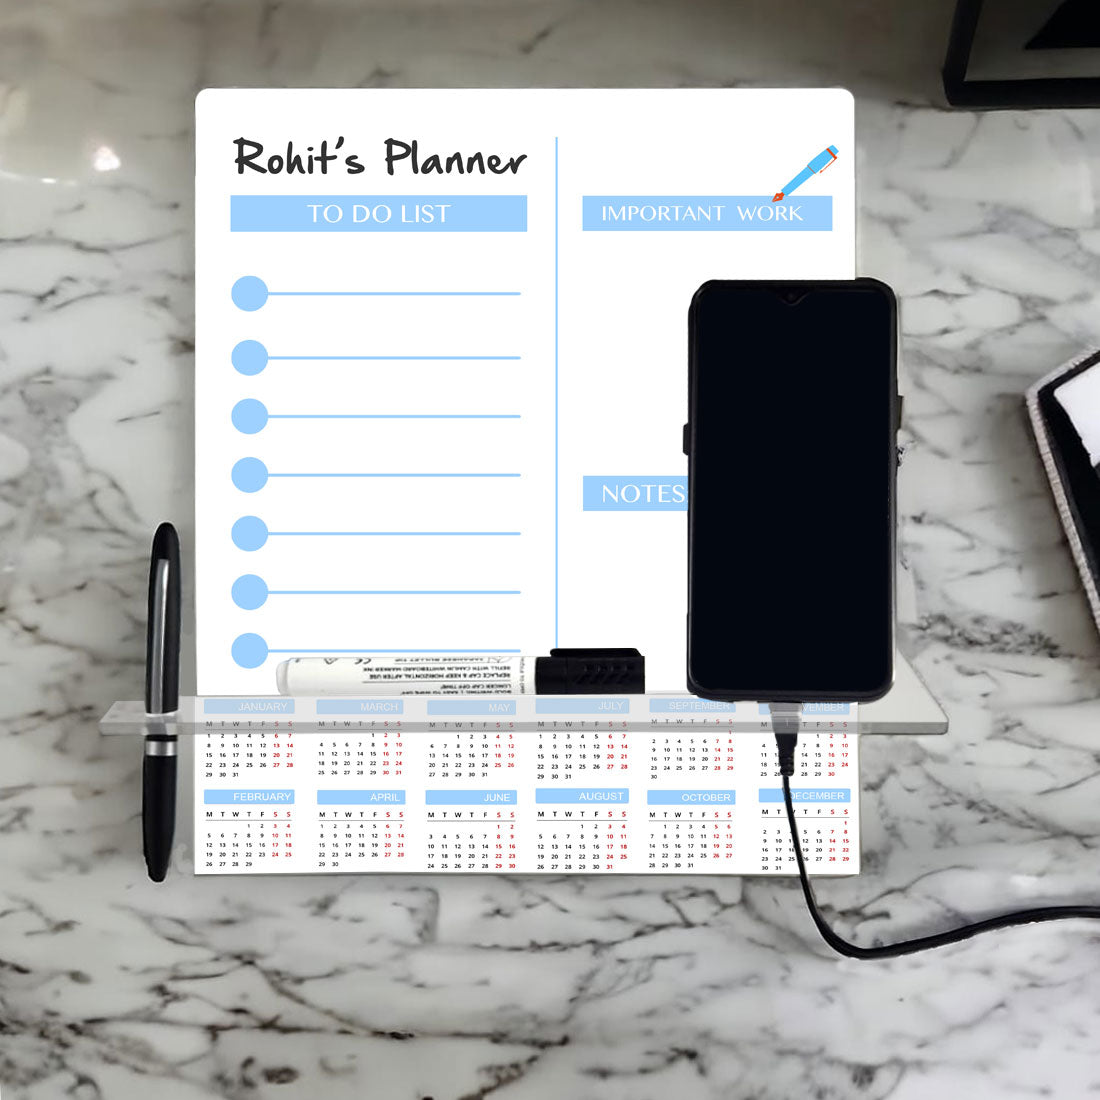 Planner for Desk with Name Personalized Planning Board with Calendar and Phone Stand